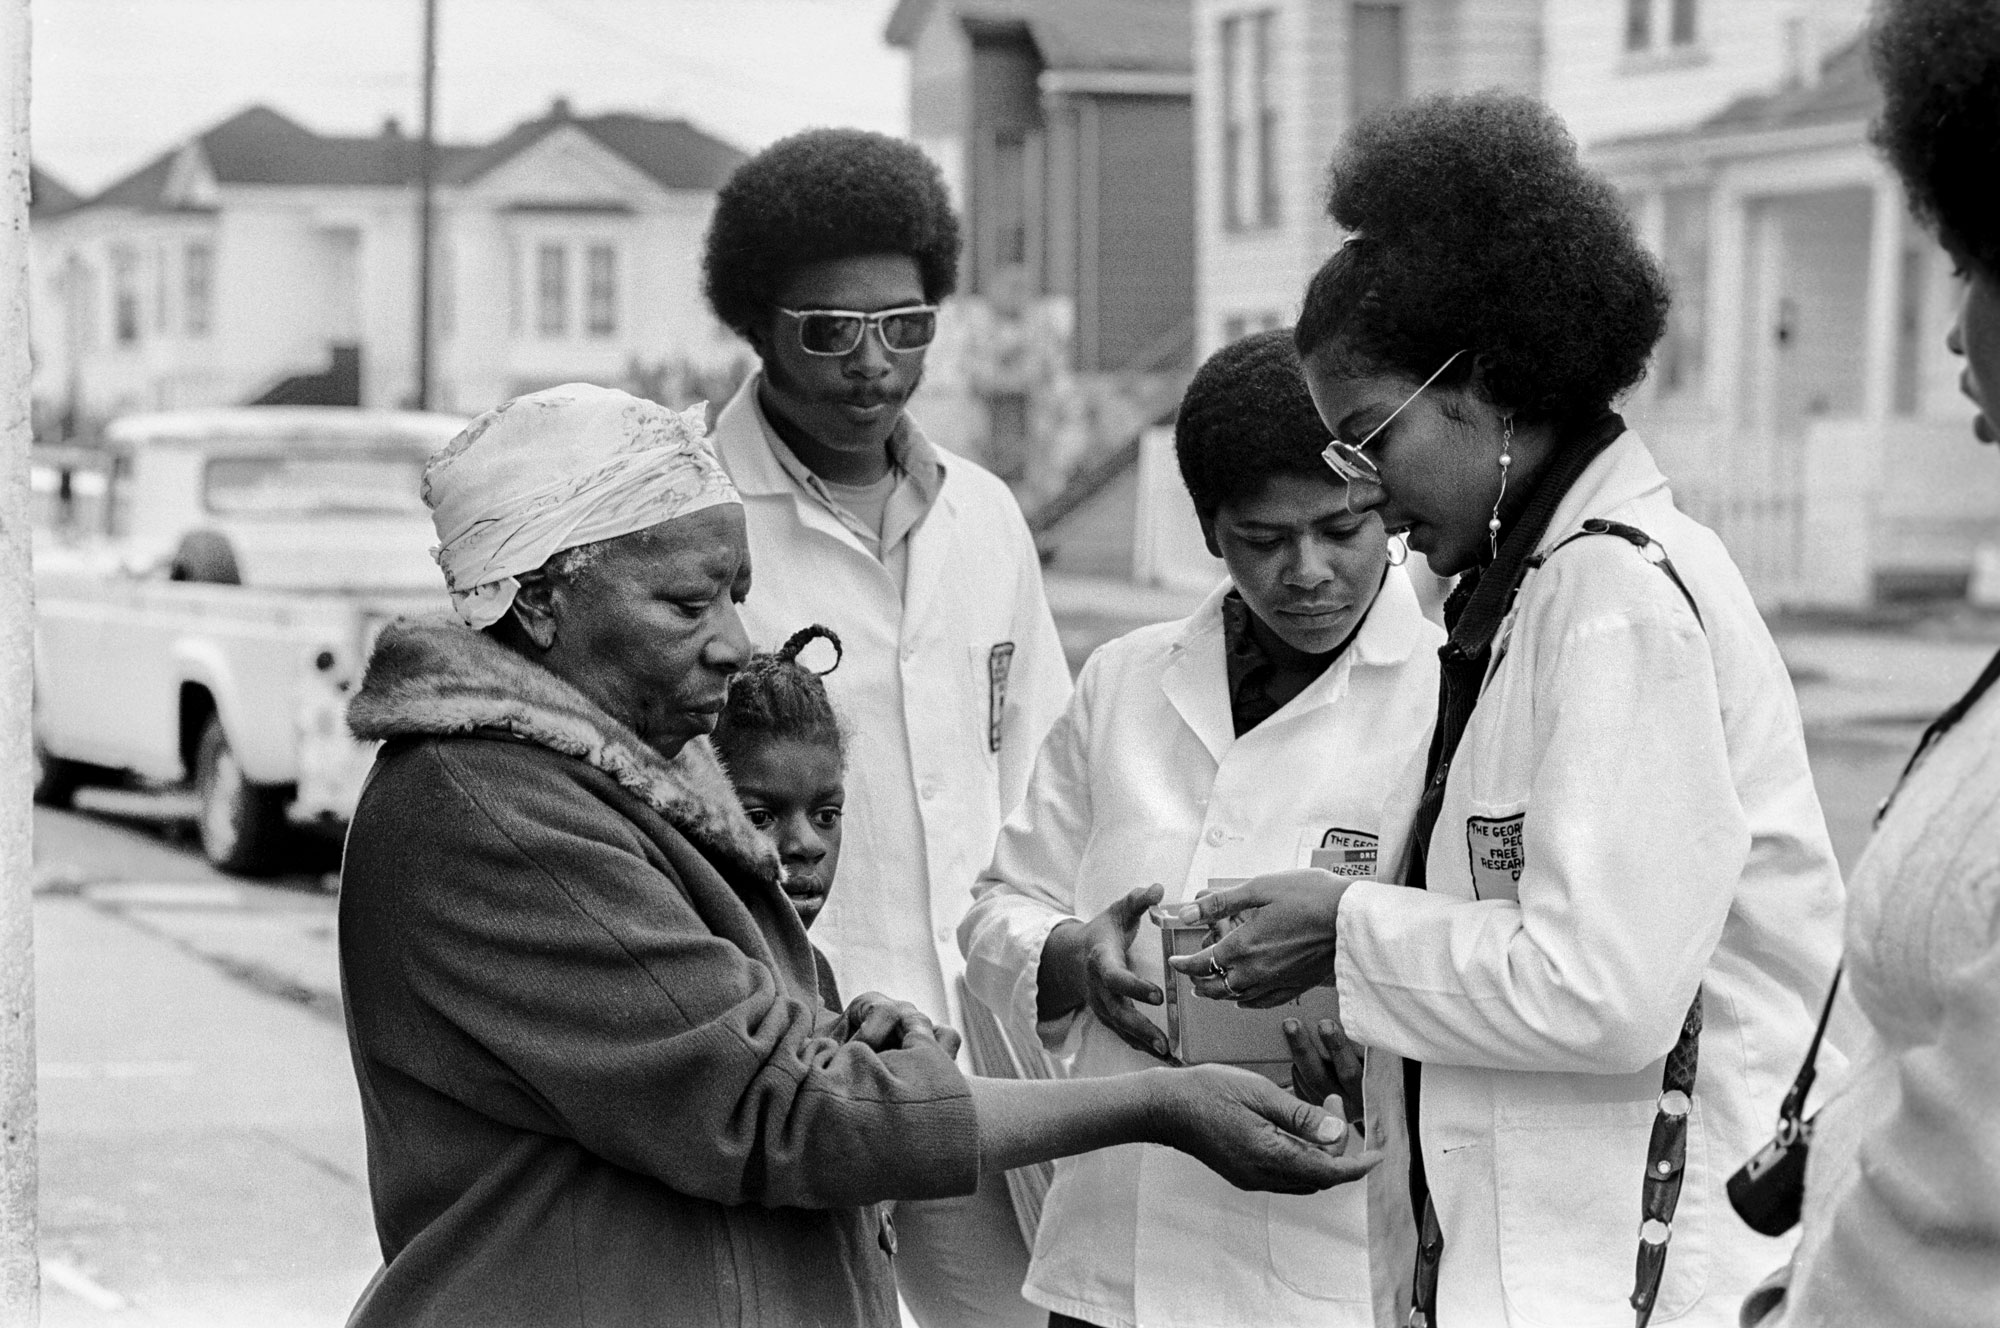 Adrienne Humphrey tests a woman for sickle cell anemia testing during Bobby Seale’s campaign for Mayor of Oakland, California, 1973. © Stephen Shames